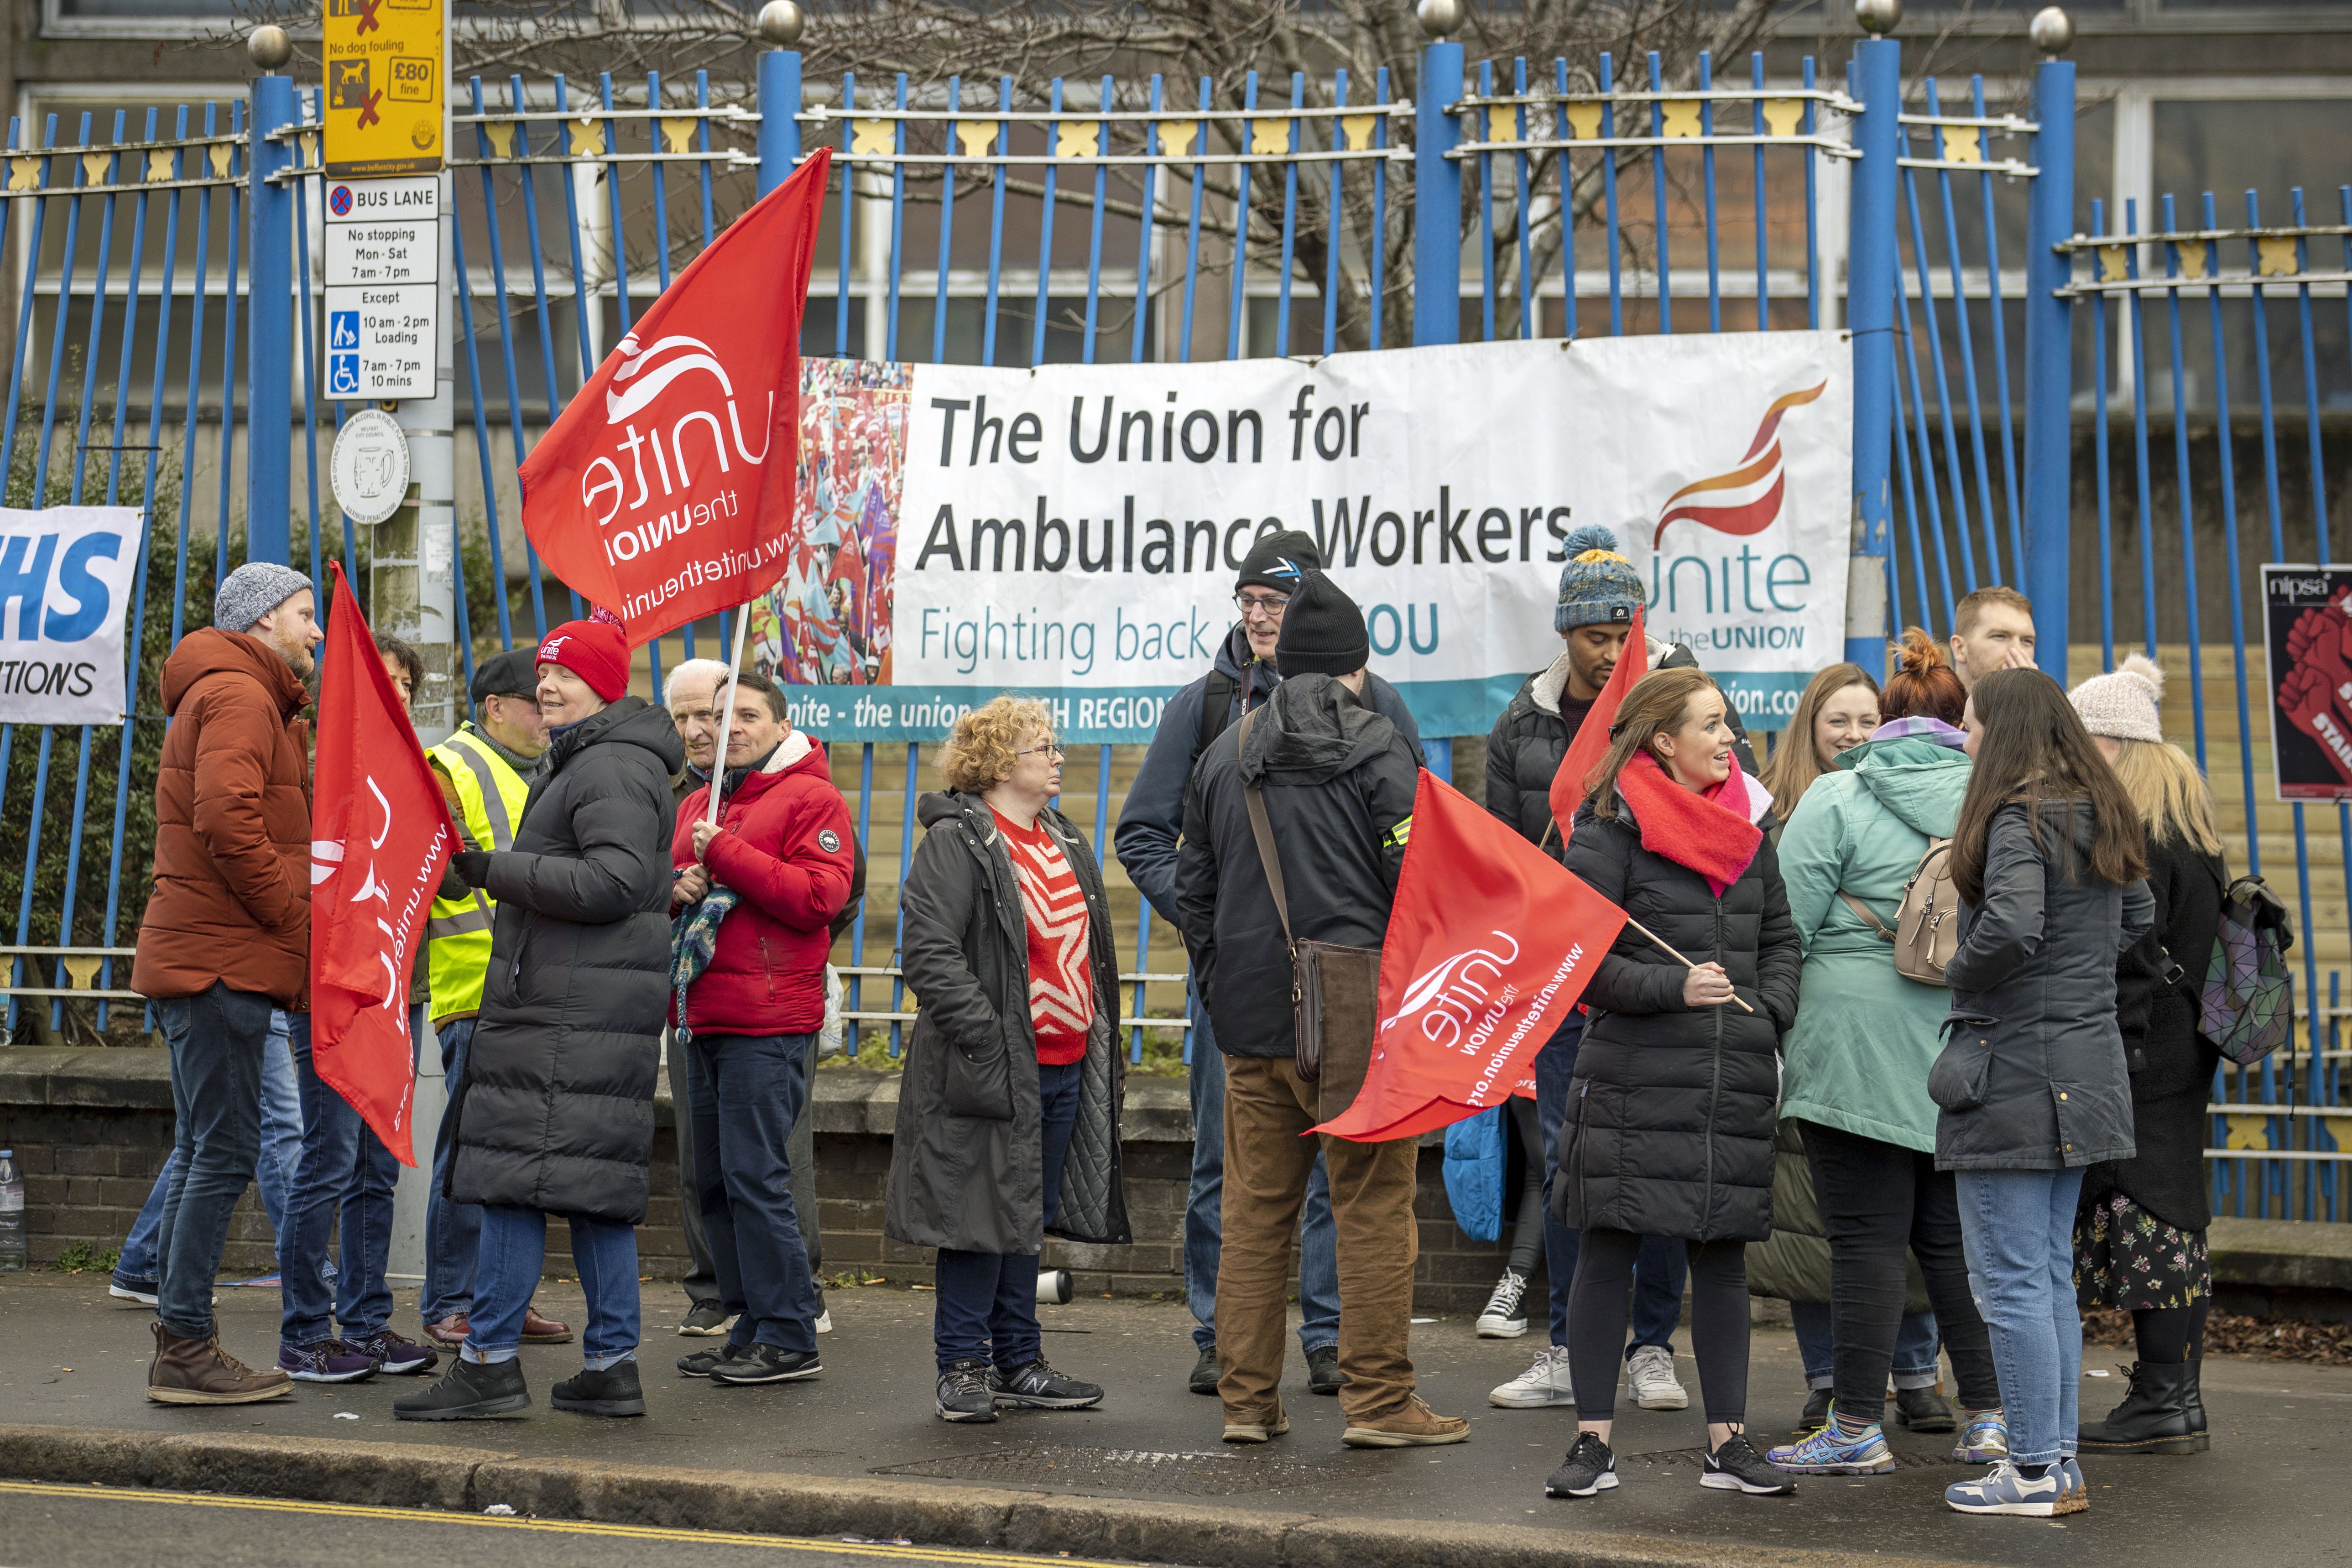 People holding Unite union flags on the picket line outside the Royal Victoria Hospital in Belfast, as thousands of health and social care workers, including paramedics, in Northern Ireland take part in strike action over pay and conditions (Liam McBurney/PA)